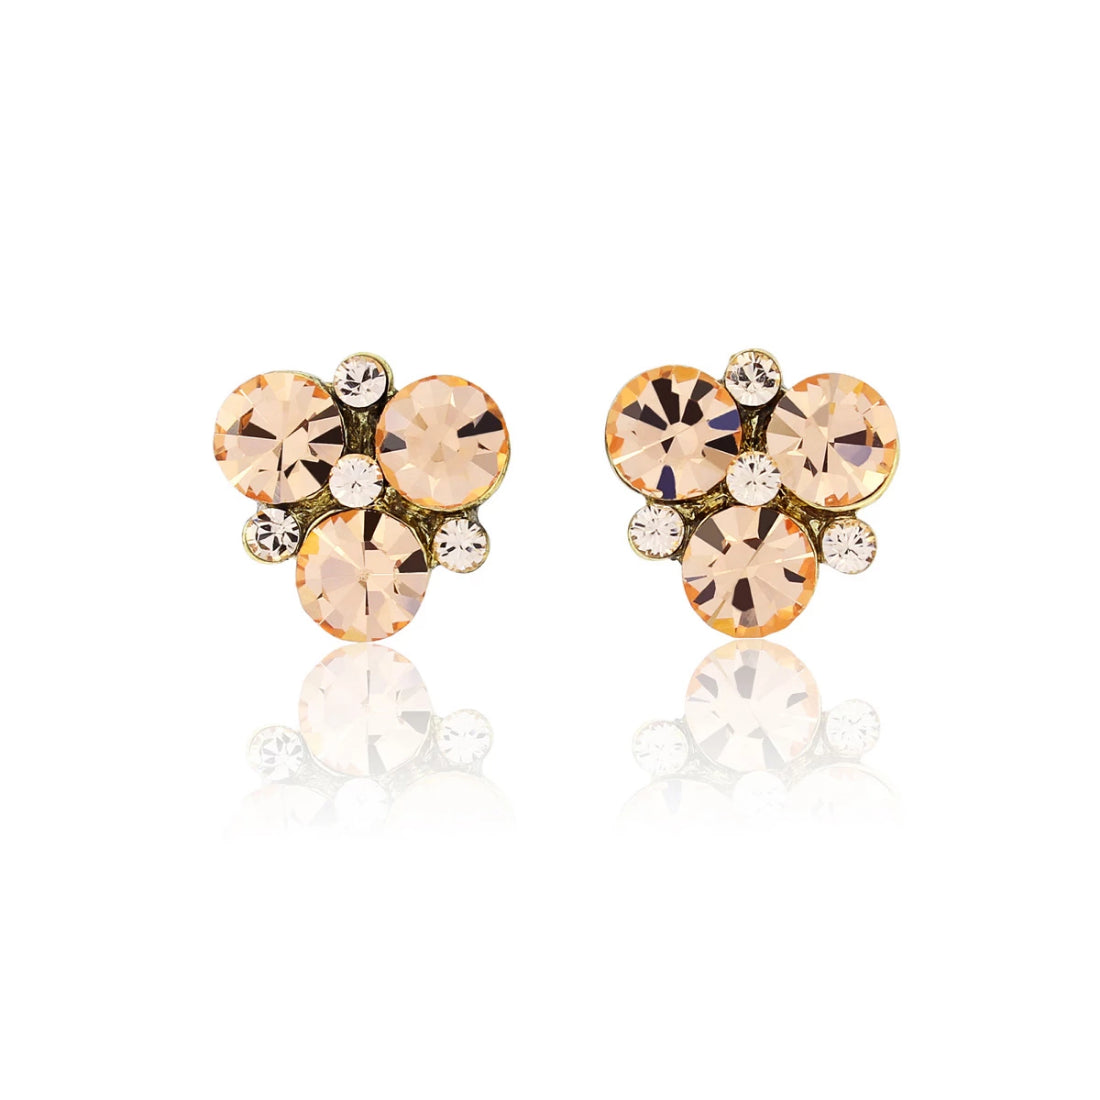 Peach Passion Gold Stud Earrings